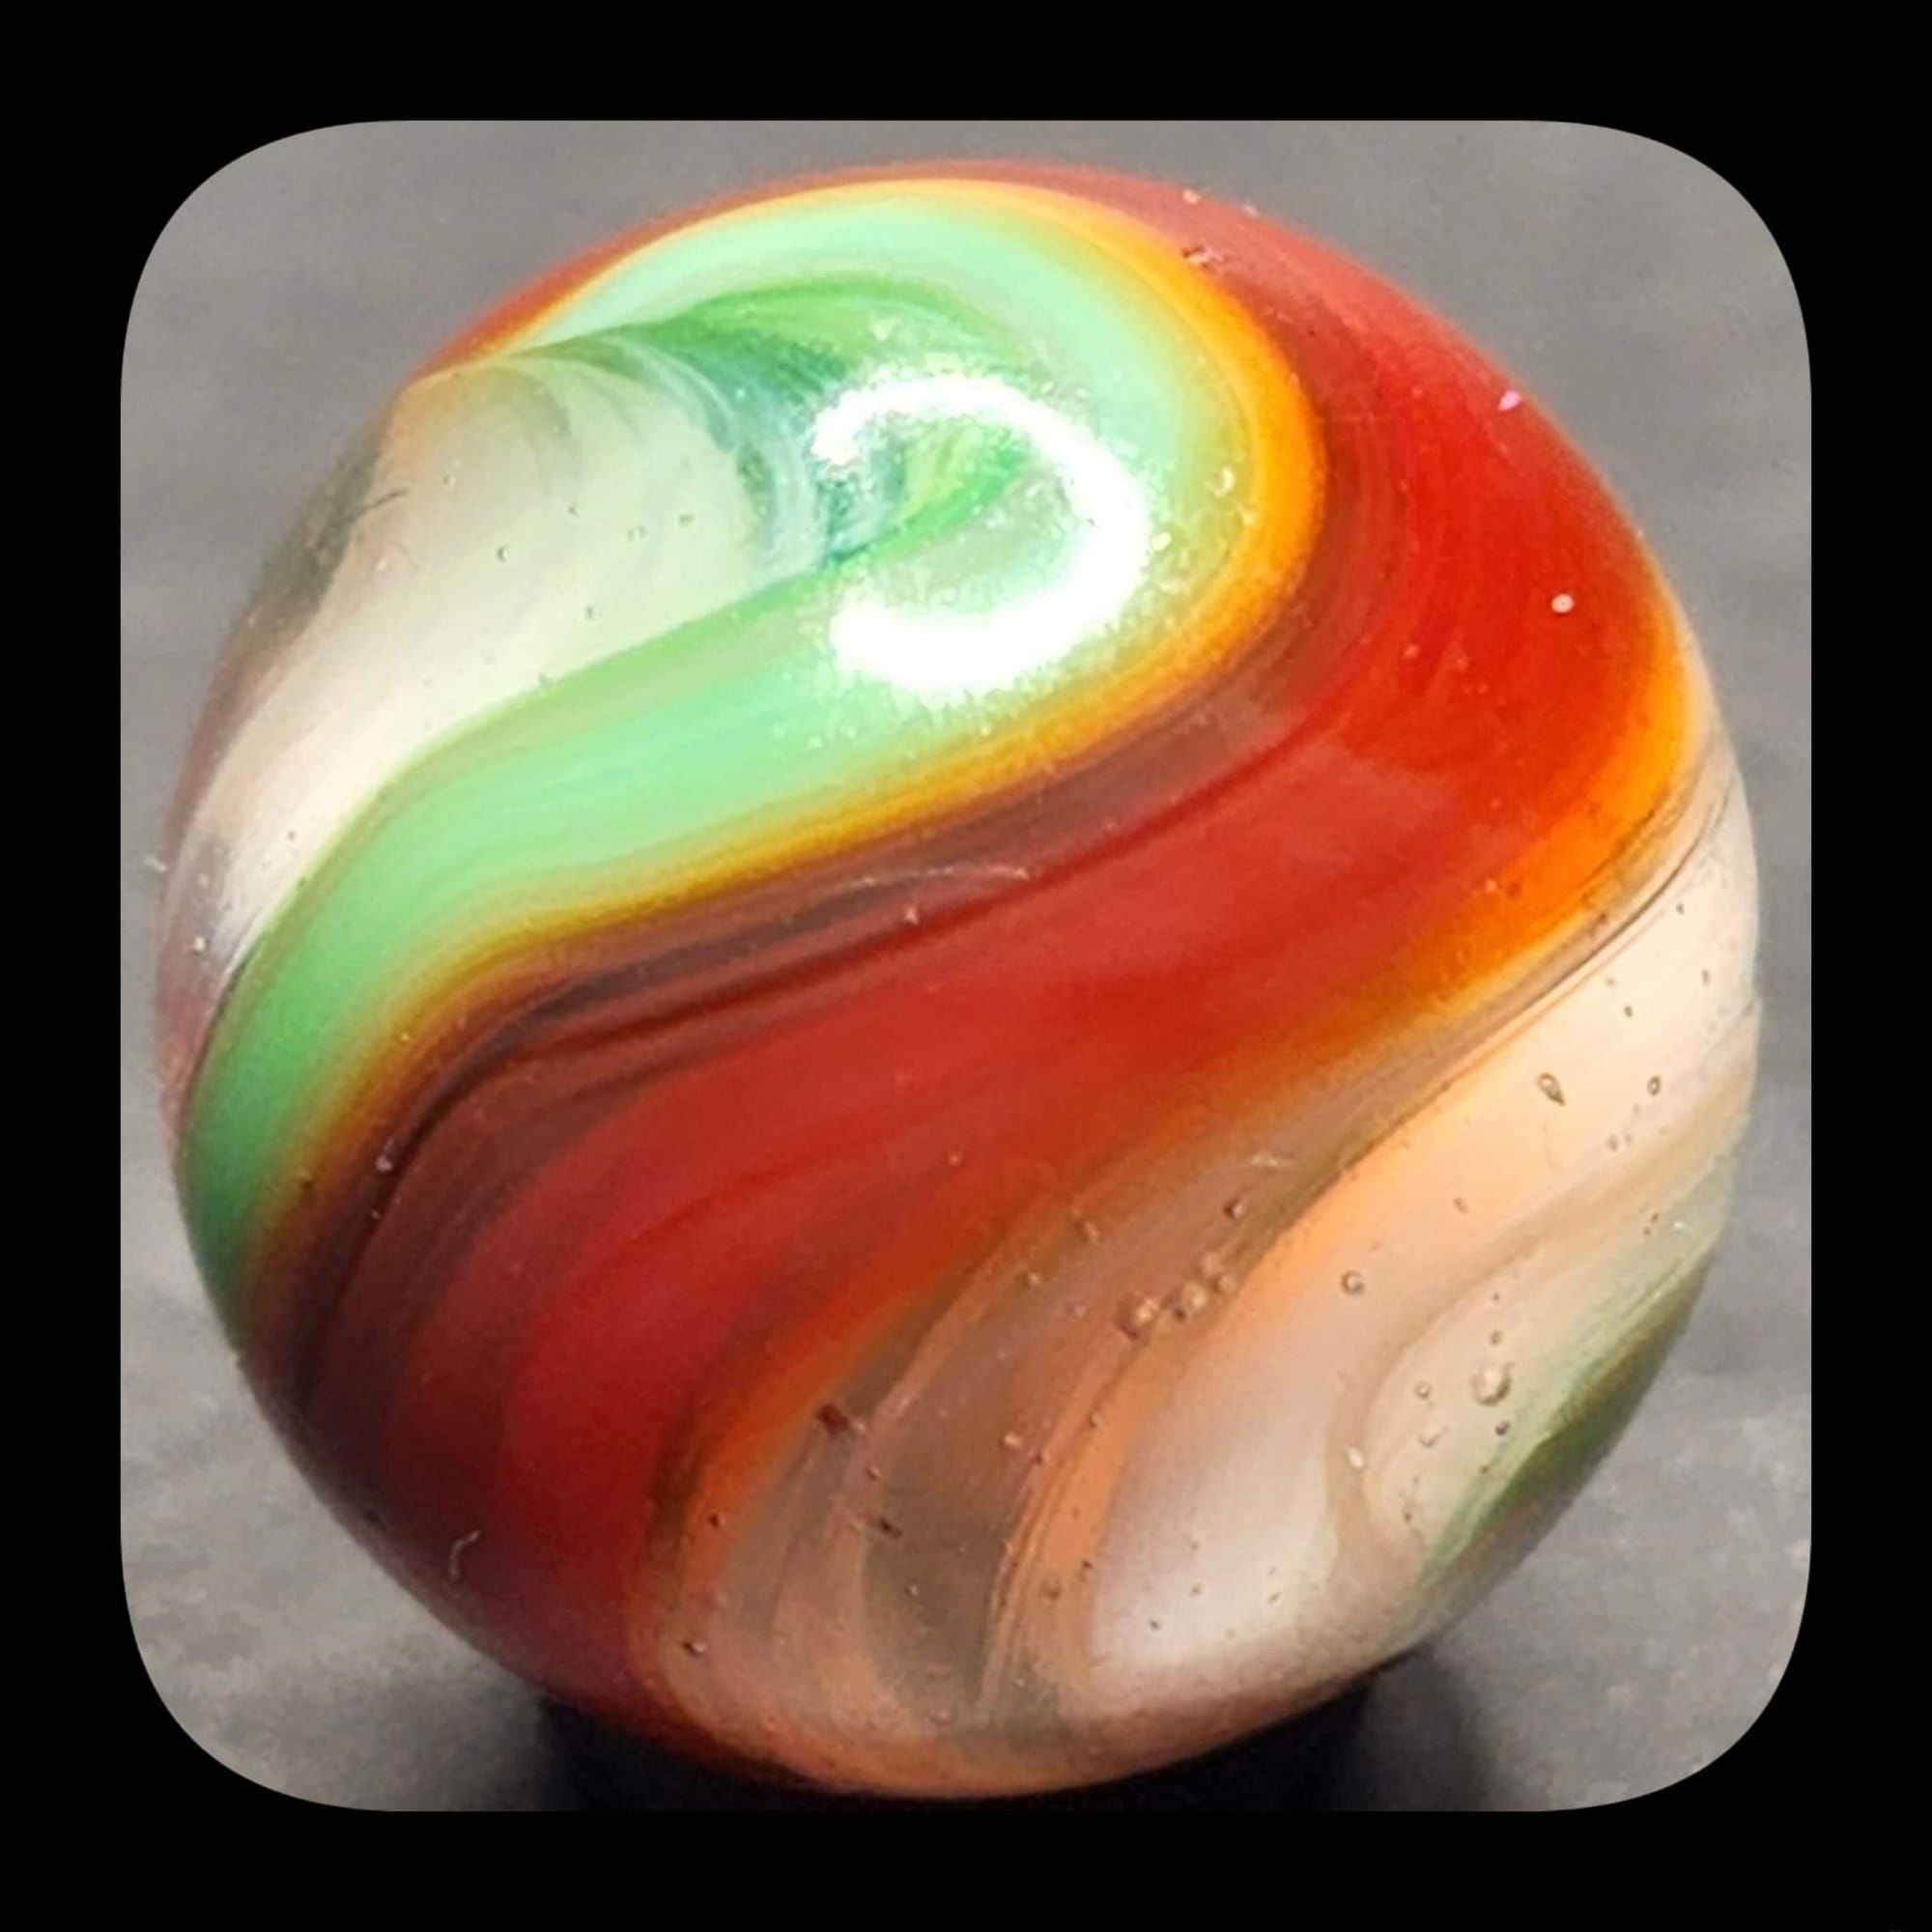 $77 5/8" Akro Agate Hybrid Popeye with Red, Orange , Brick and several shades of Green  NM++